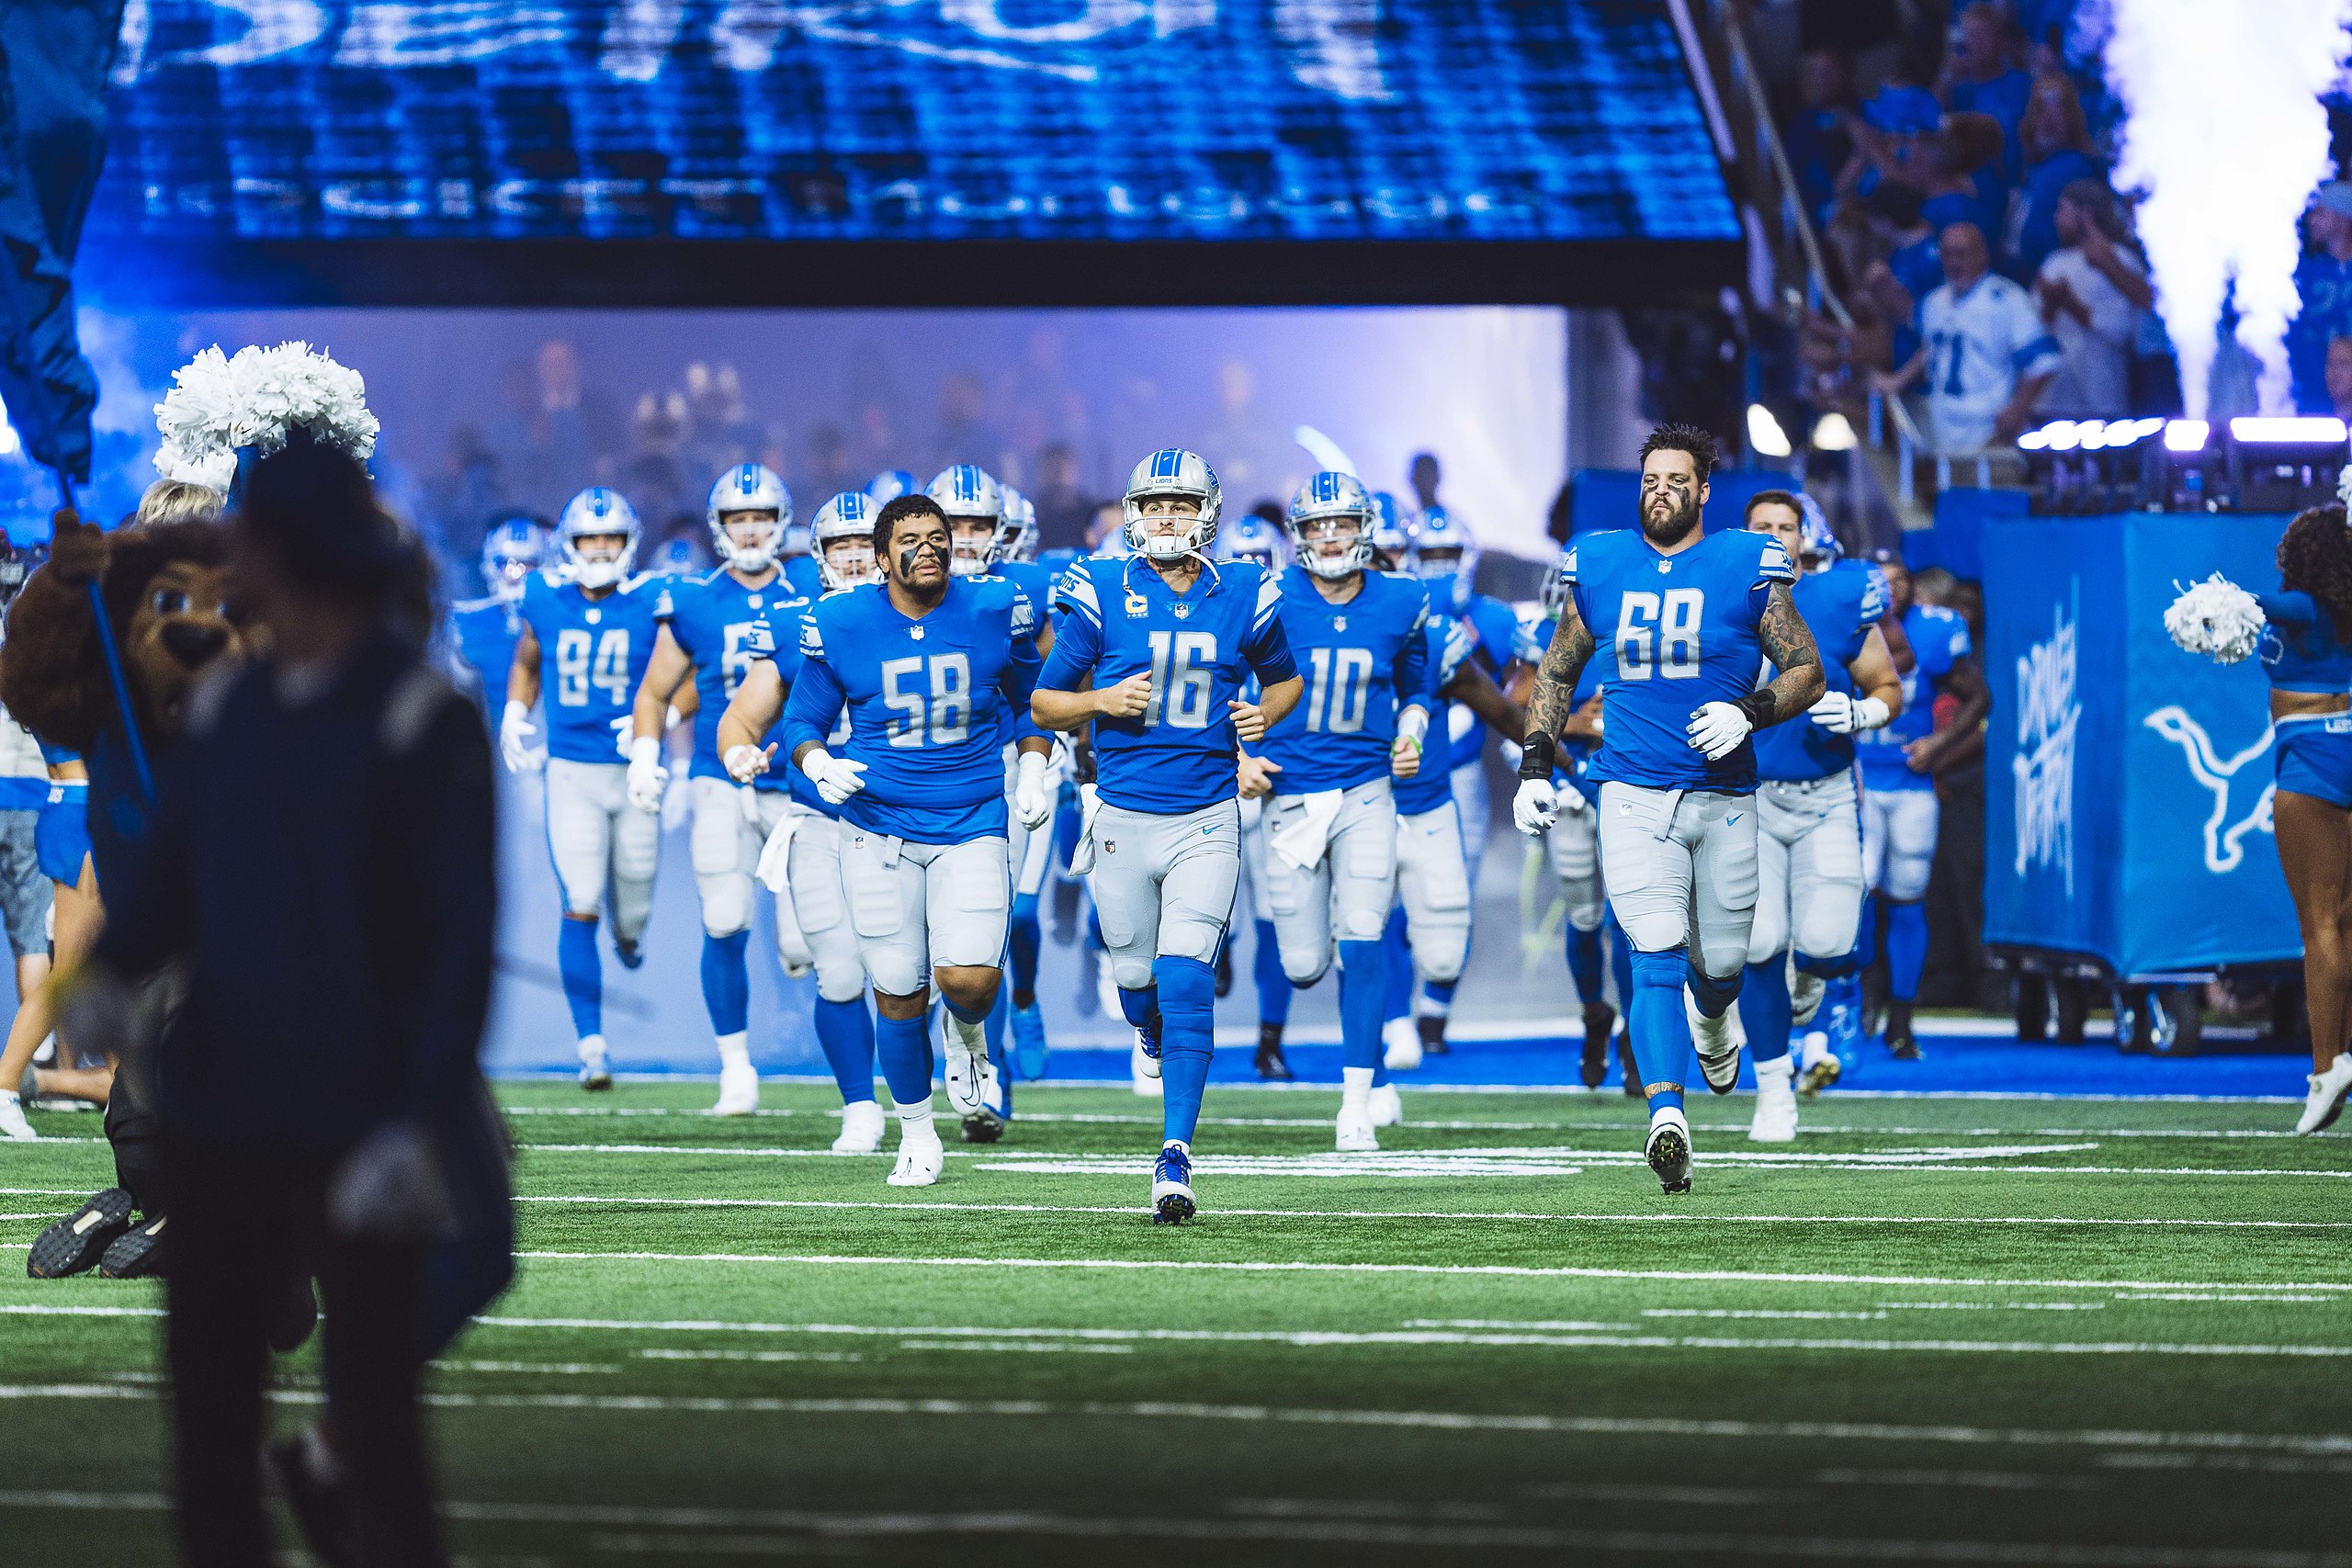 The Detroit Lion football players run out of the tunnel on a field.